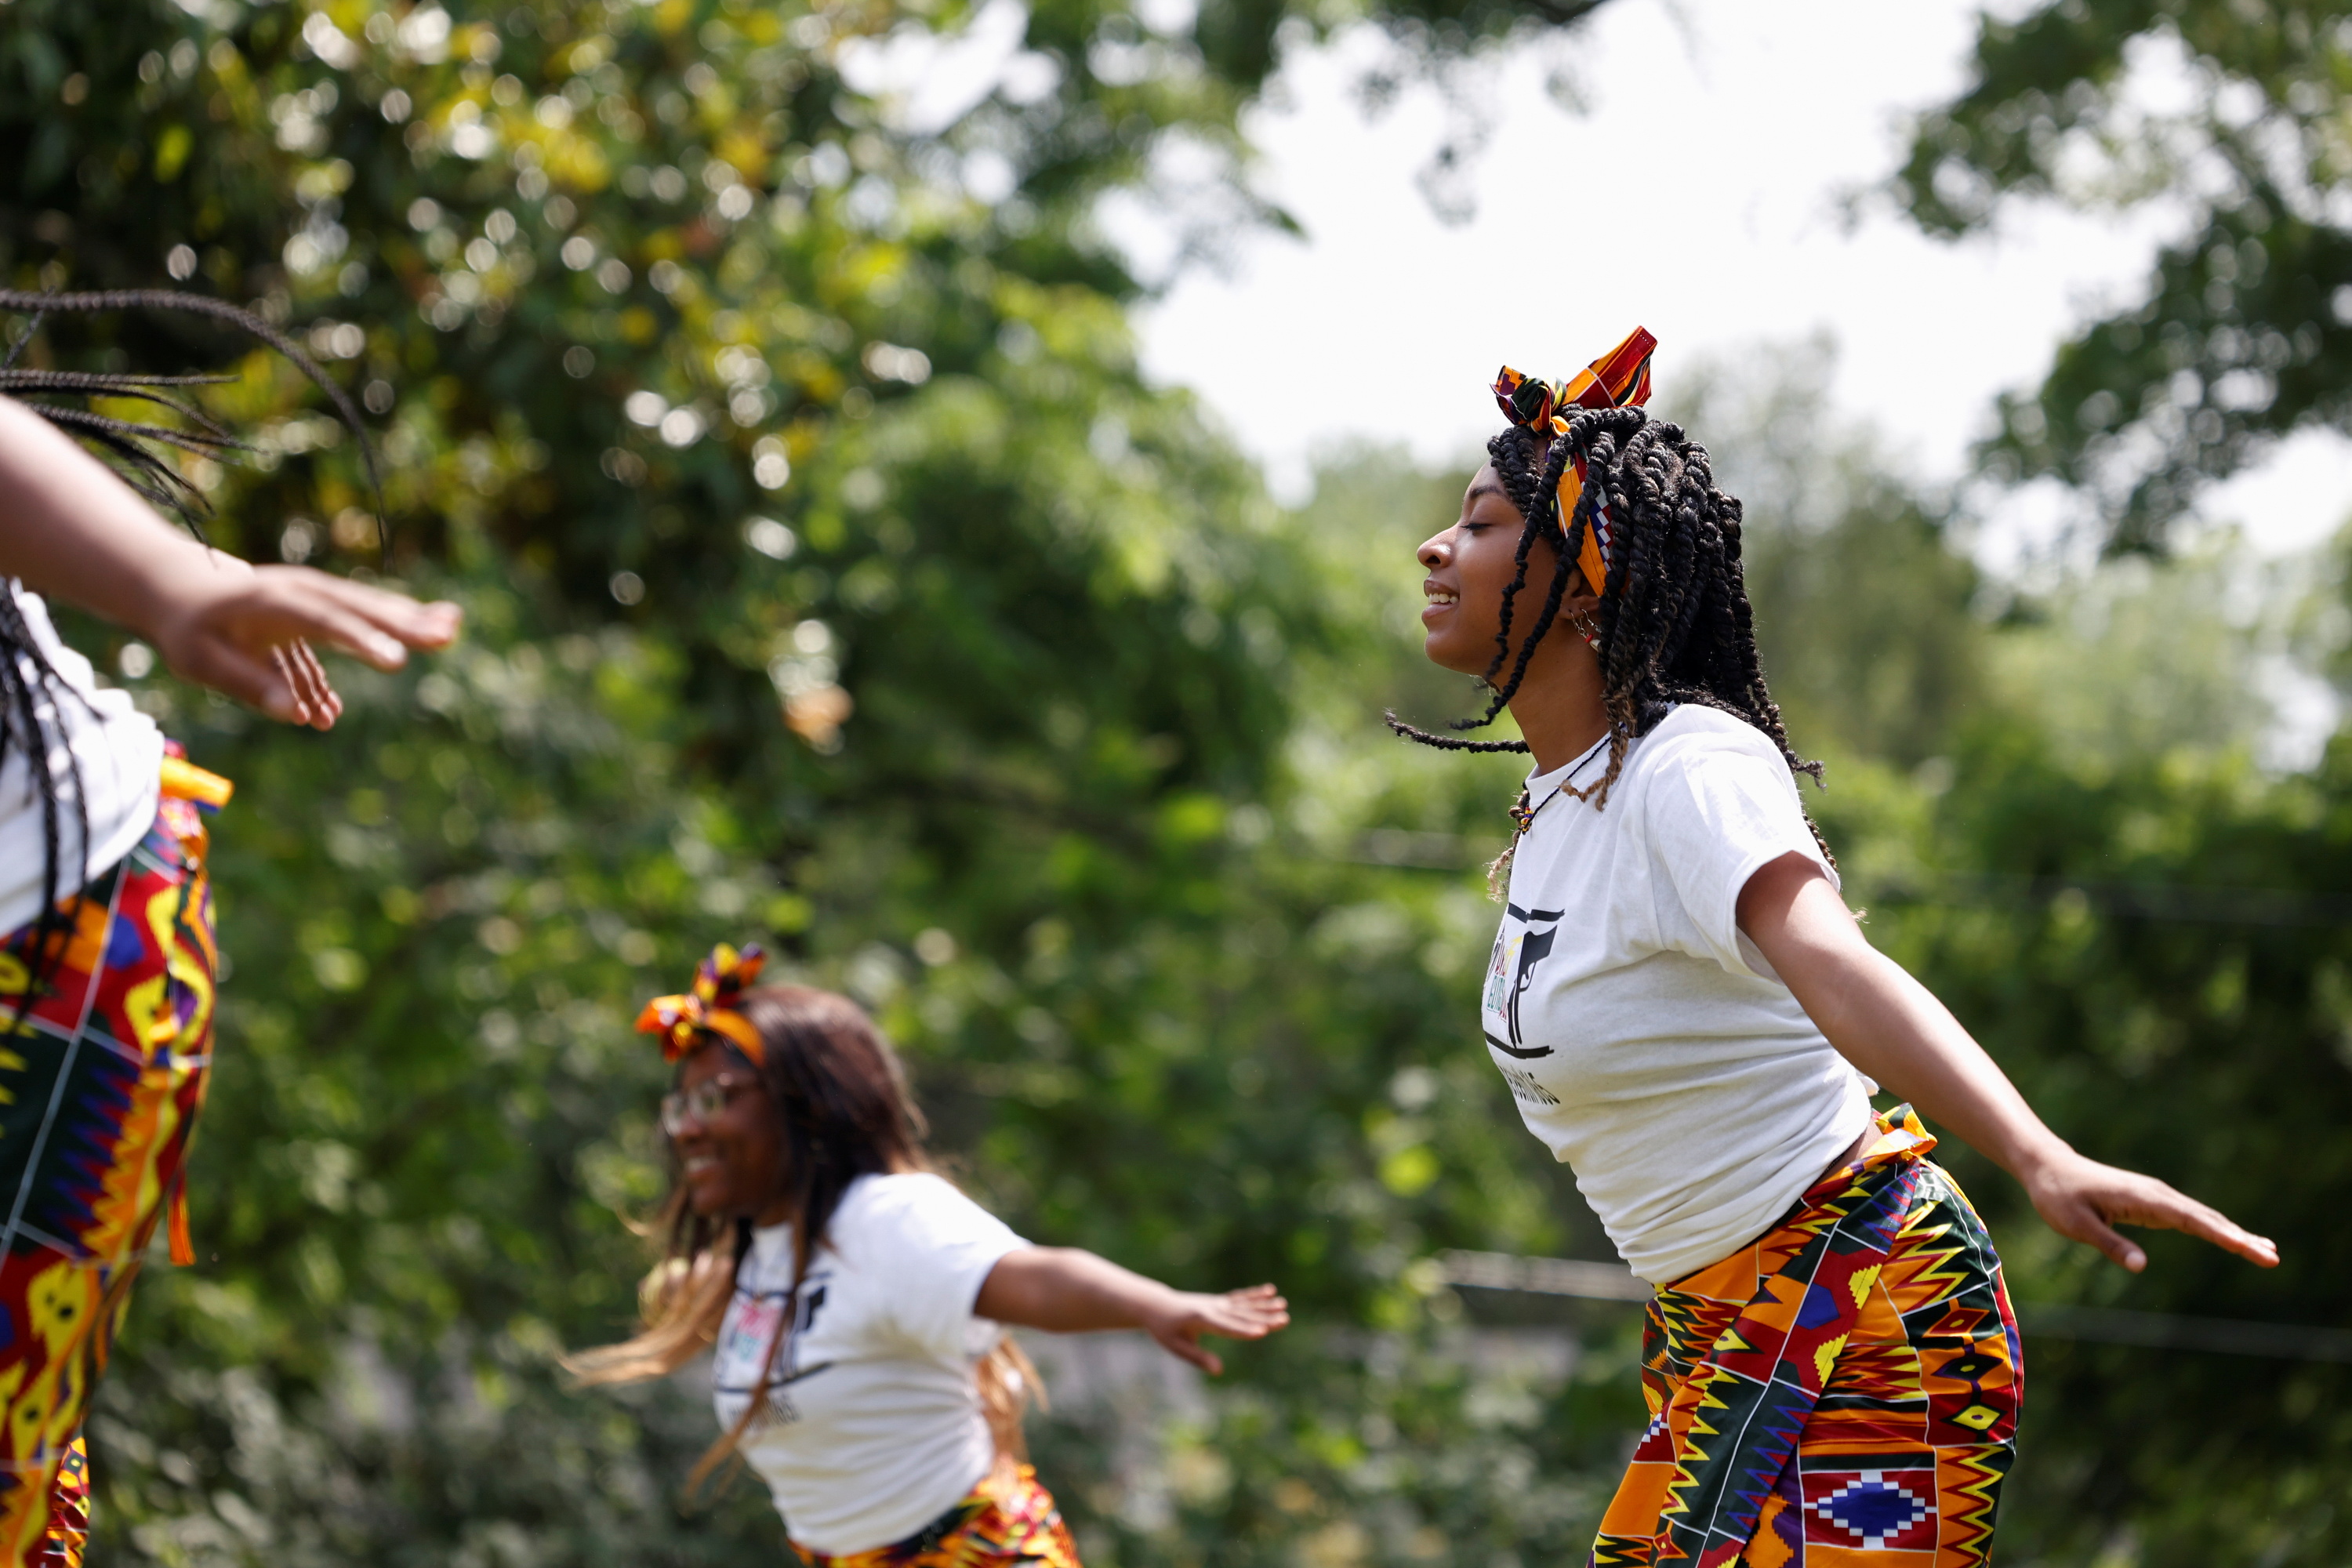 Jamya Jamison, 17, performs traditional West African dance at the Juneteenth celebration at Memorial Park in Kingsport